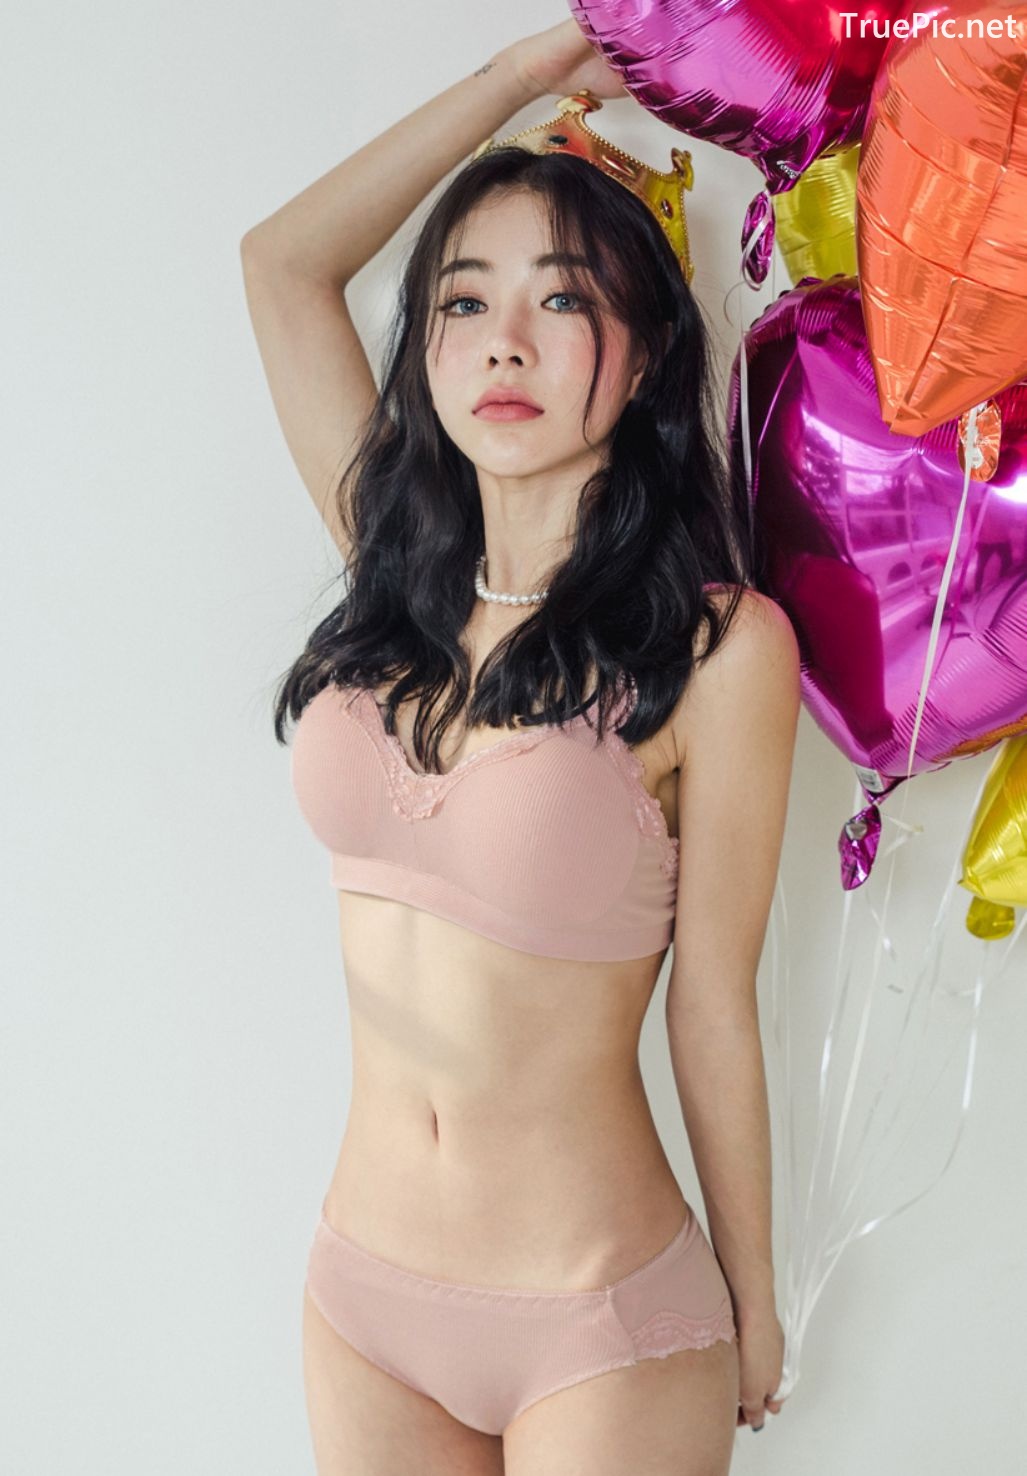 Image-Korean-Fashion-Model-An-Seo-Rin-7-Lingerie-Set-For-A-Week-TruePic.net- Picture-41